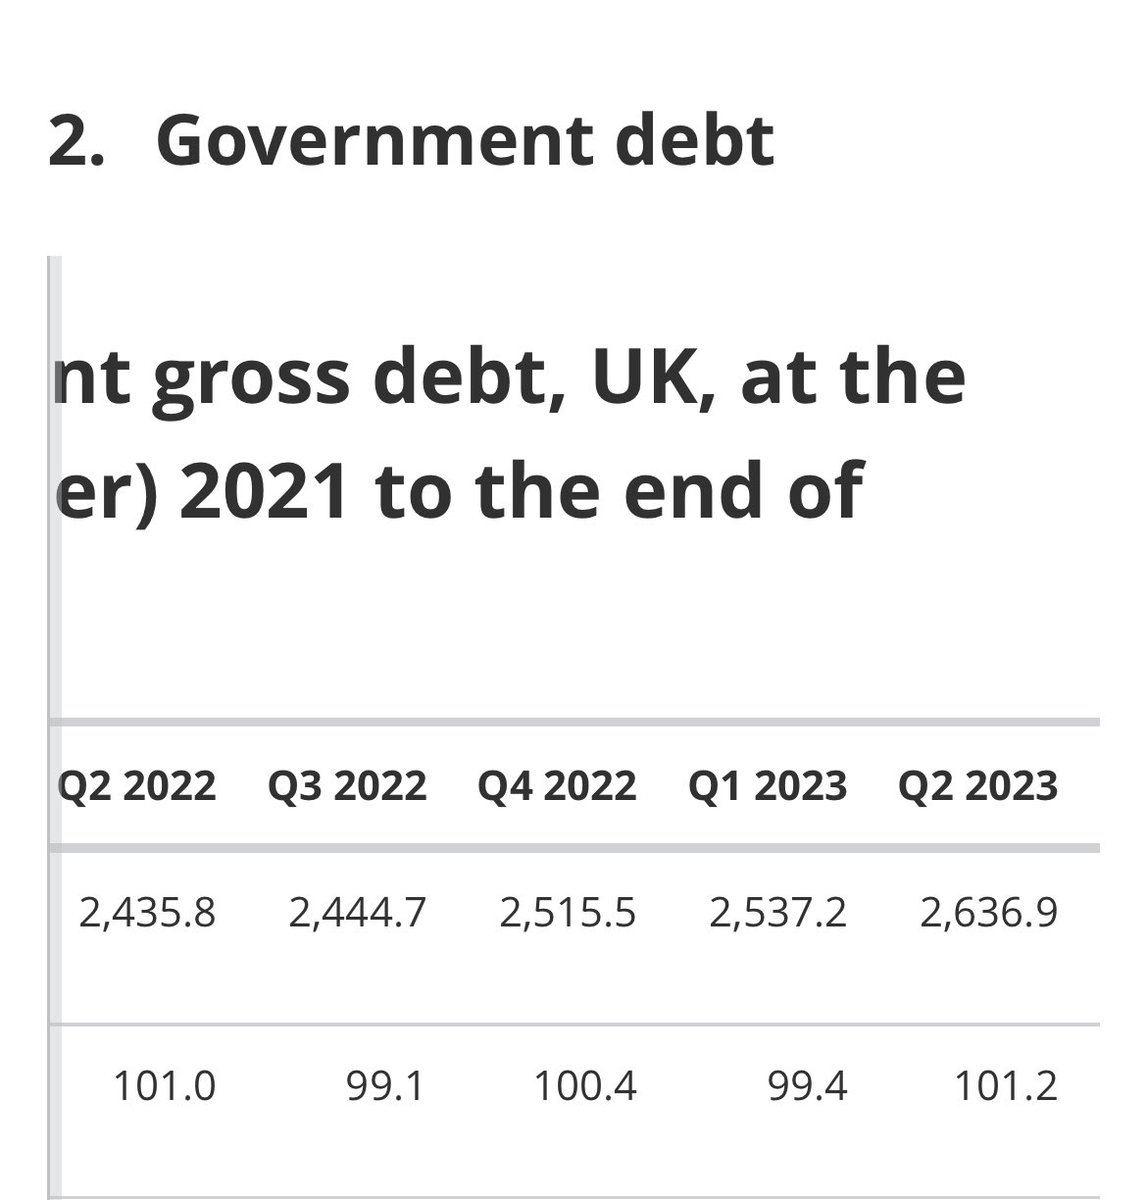 UK debt to GDP.
It’s a fuckin bin-fire you clown.

Read up instead of spouting utter pish that highlights your ignorance.

ons.gov.uk/economy/govern…